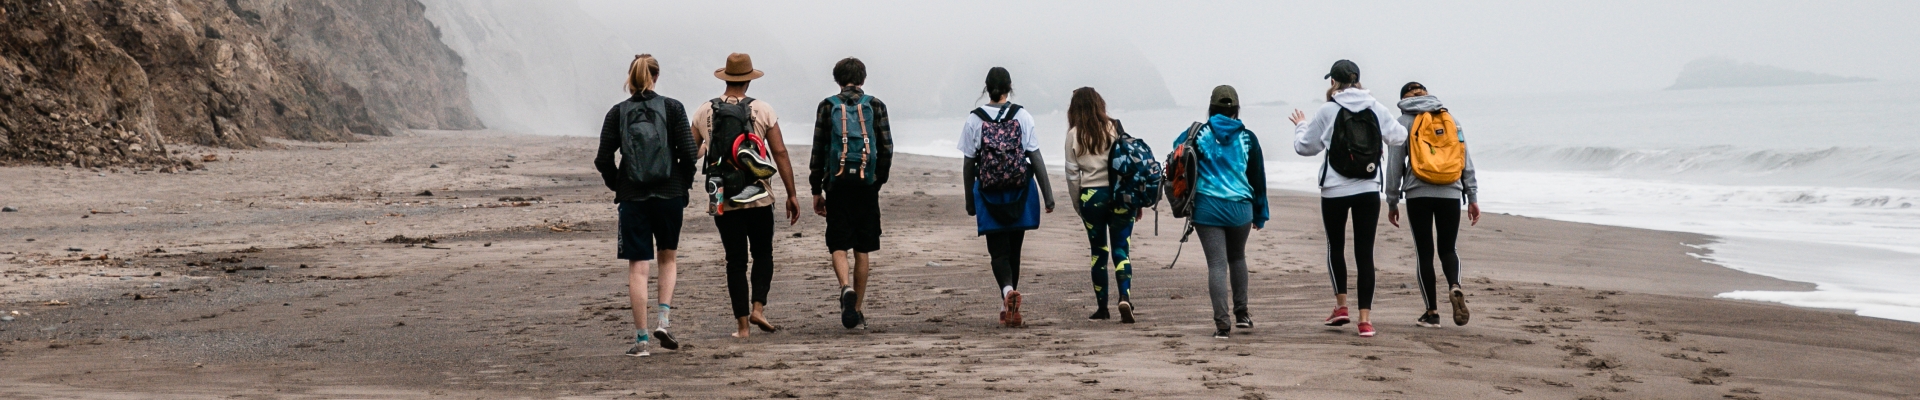 Students walking on the beach